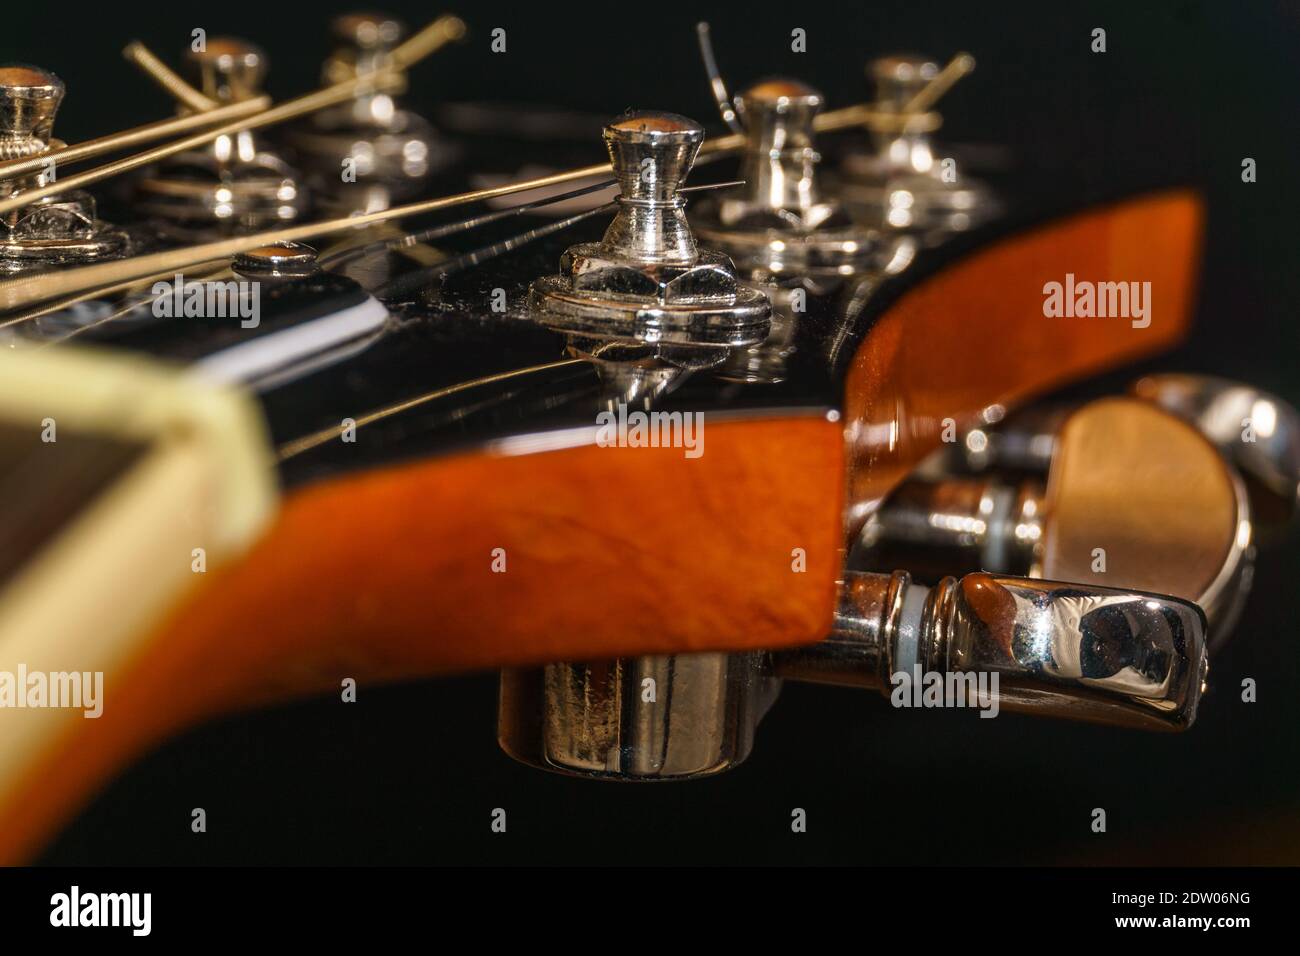 Close-up of a guitar head with mechanics and strings Stock Photo